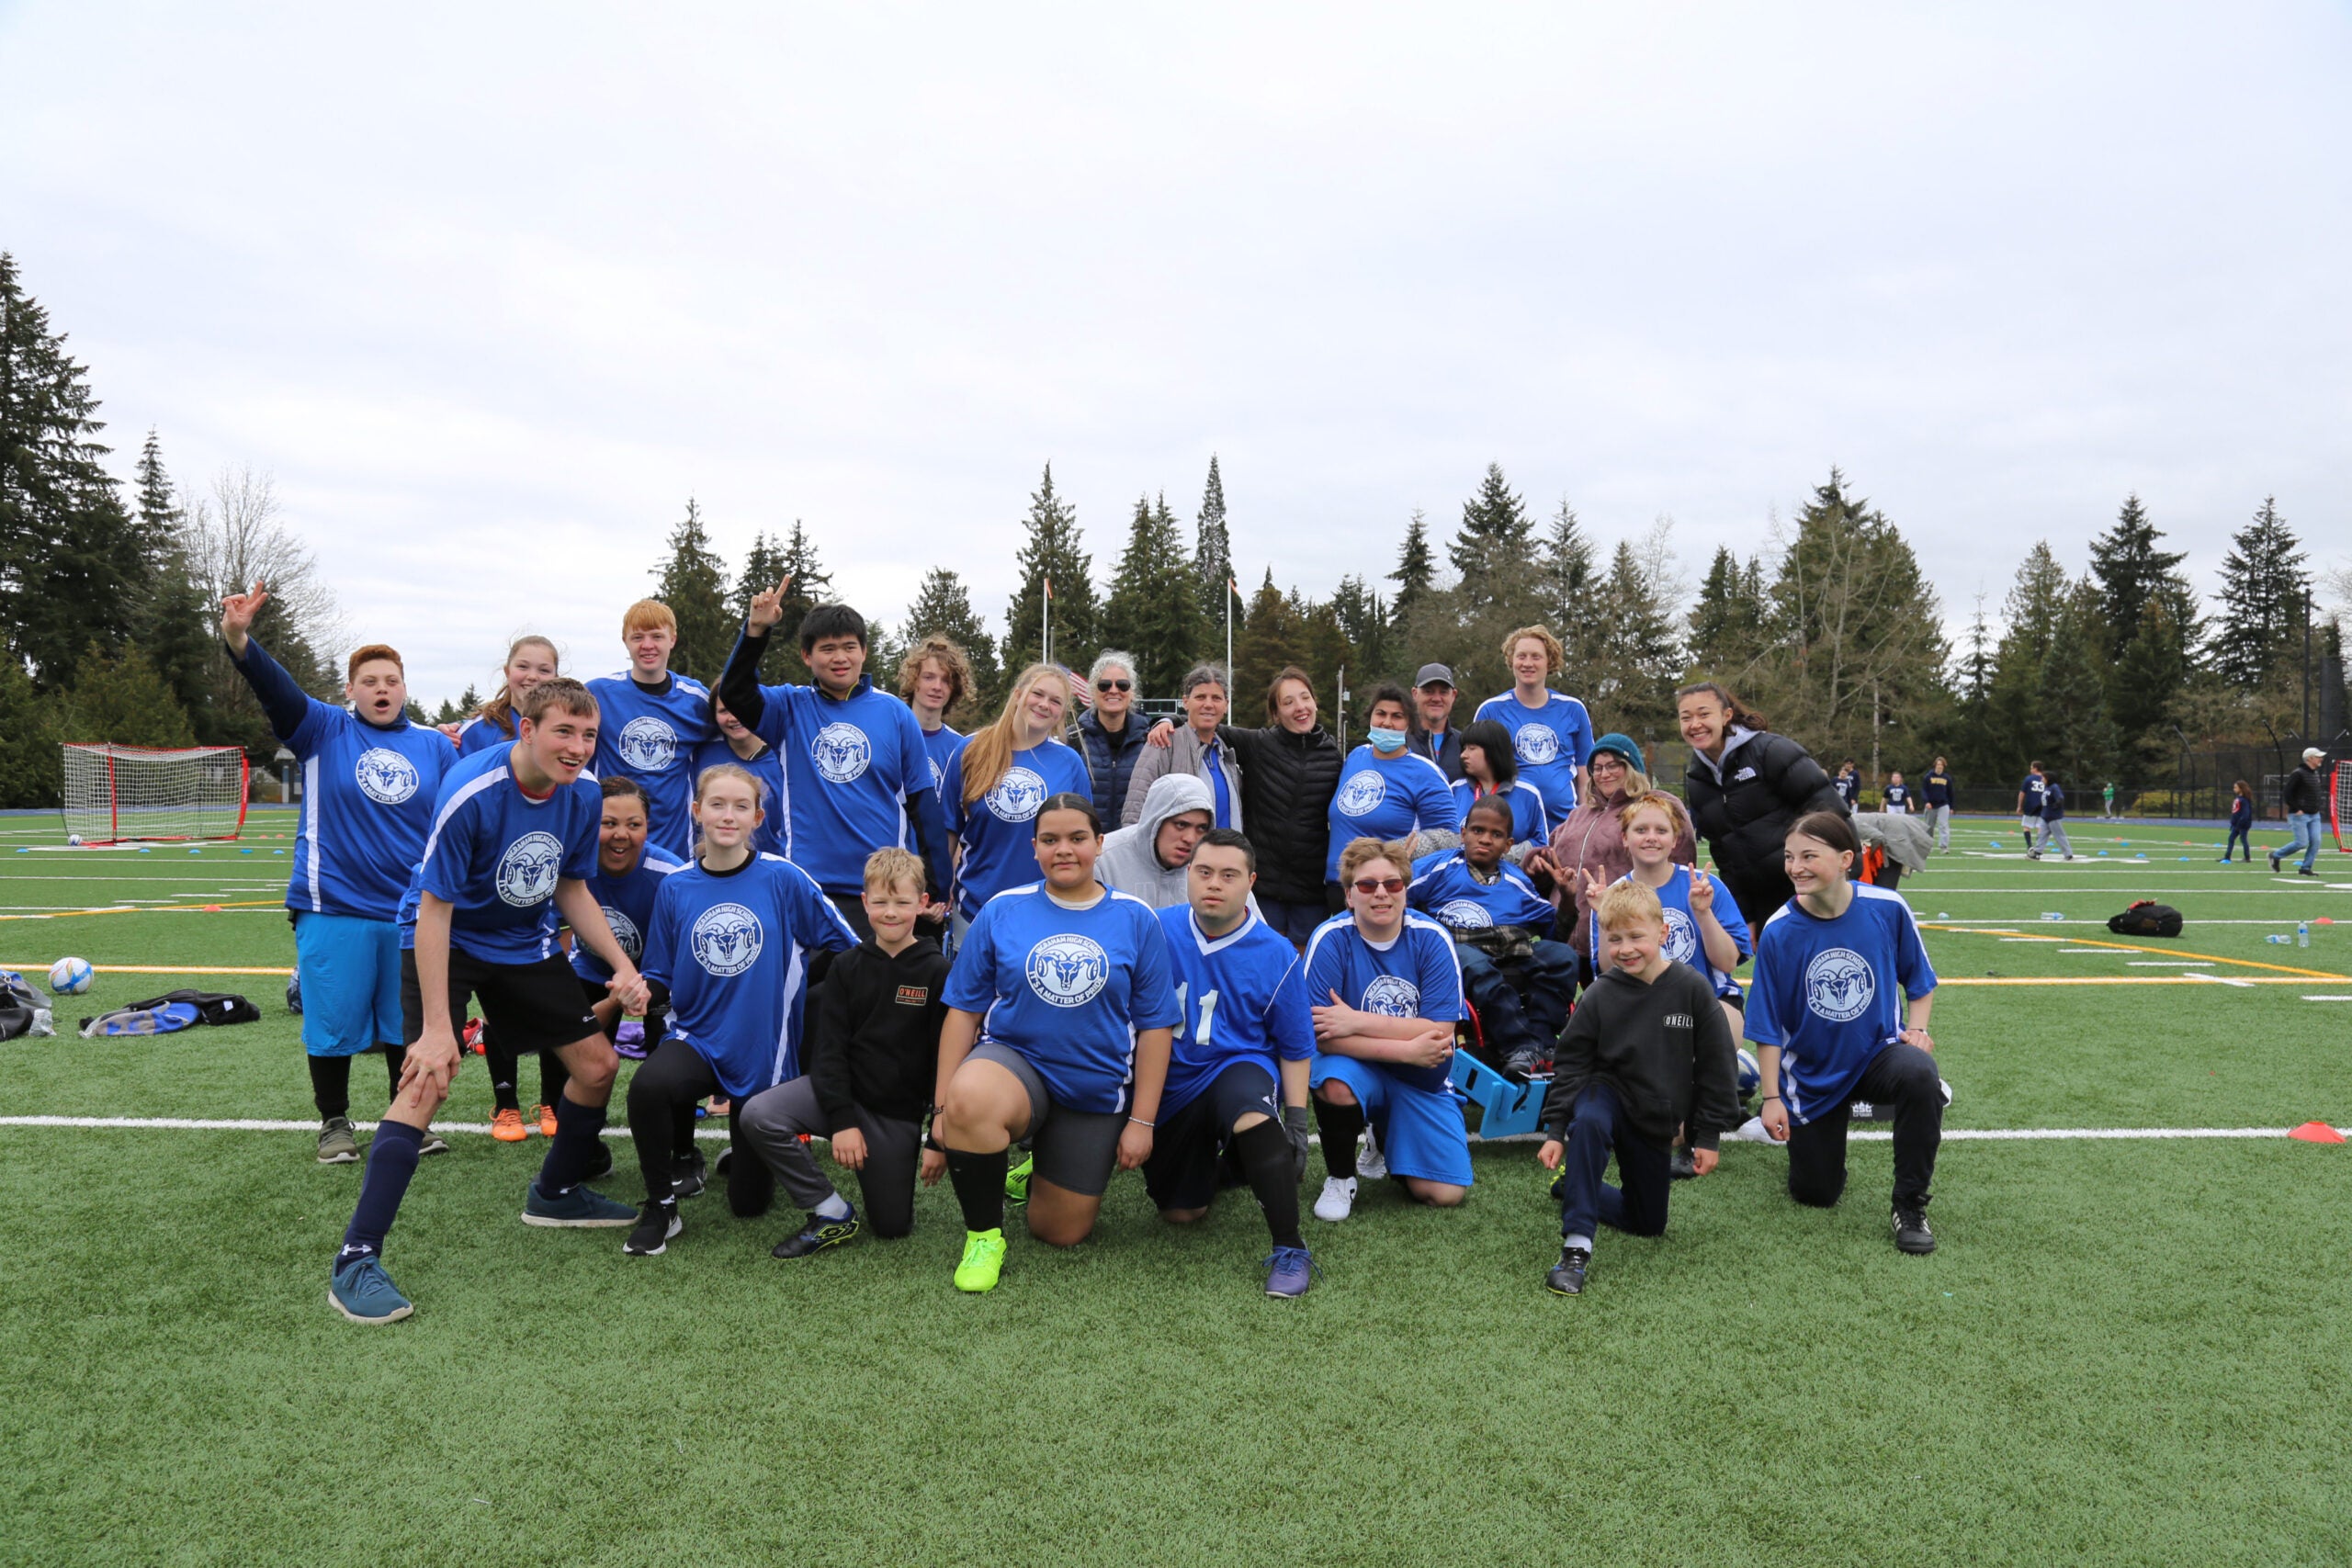 Ingraham High School's Unified Sports soccer team smiling for the camera.